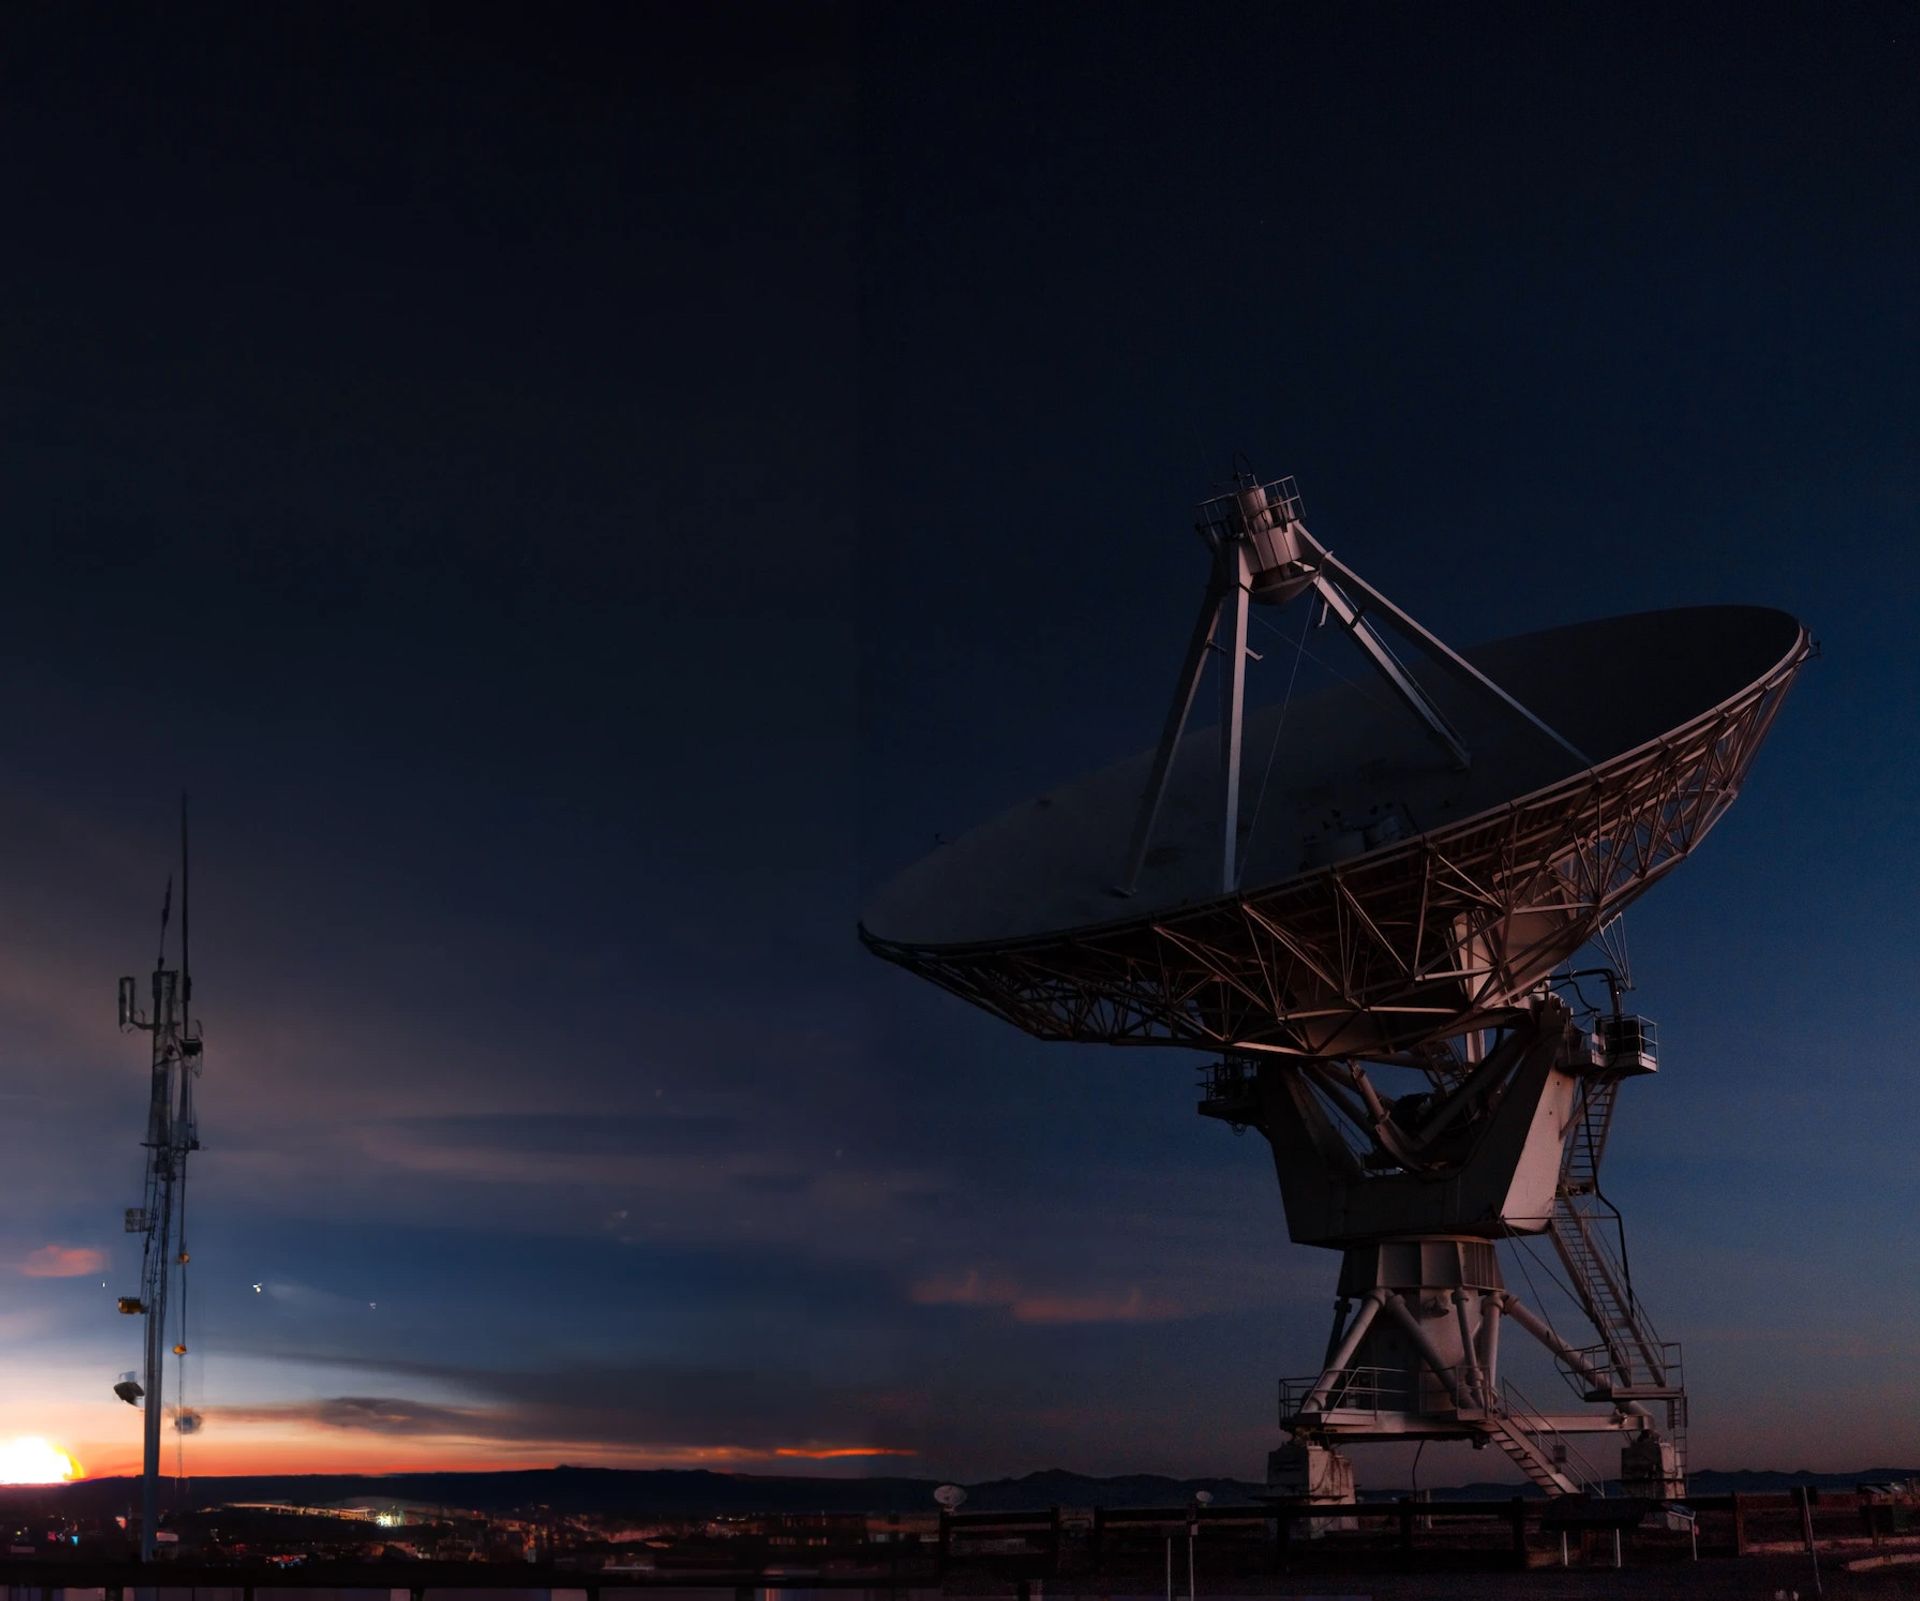 Background image for Vue js developer, a satallite dish points towards space with a deep blue evening sky and orange sunset in the background